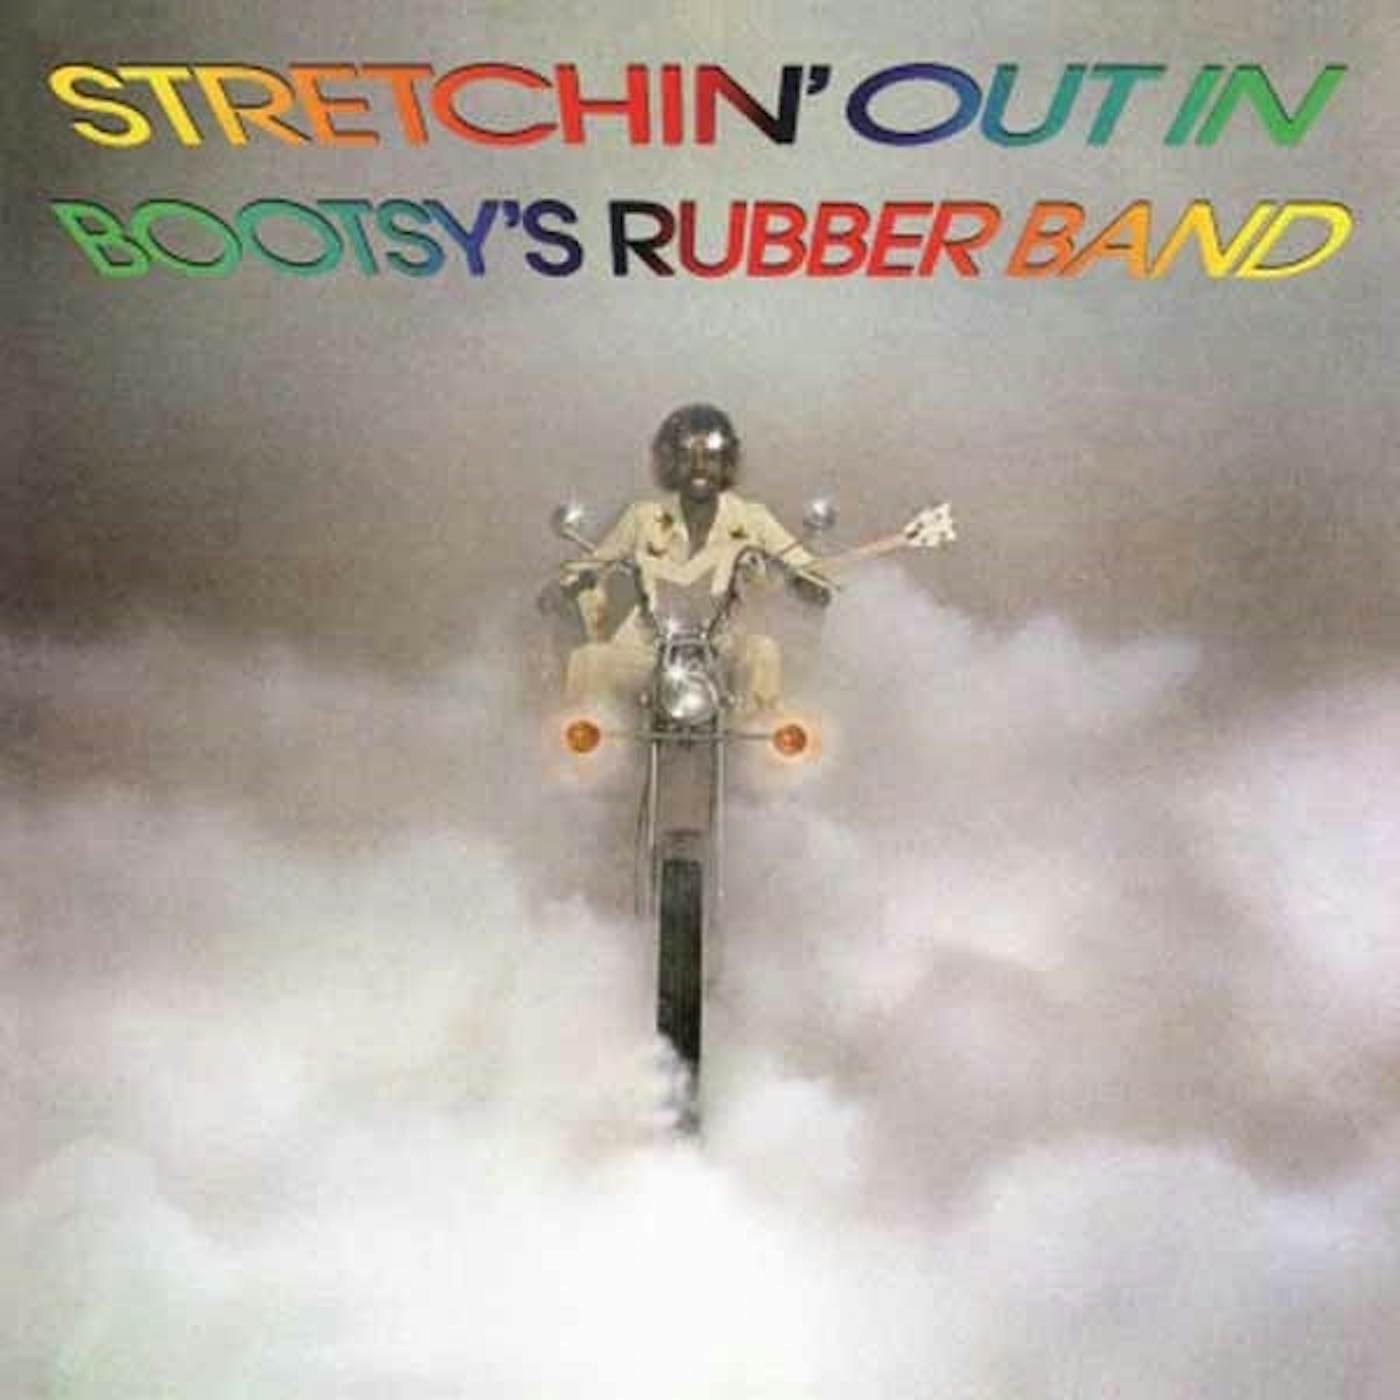 Bootsys Rubber Band LP - Stretchin' Out In Bootsy'S Rubber Band (Vinyl)